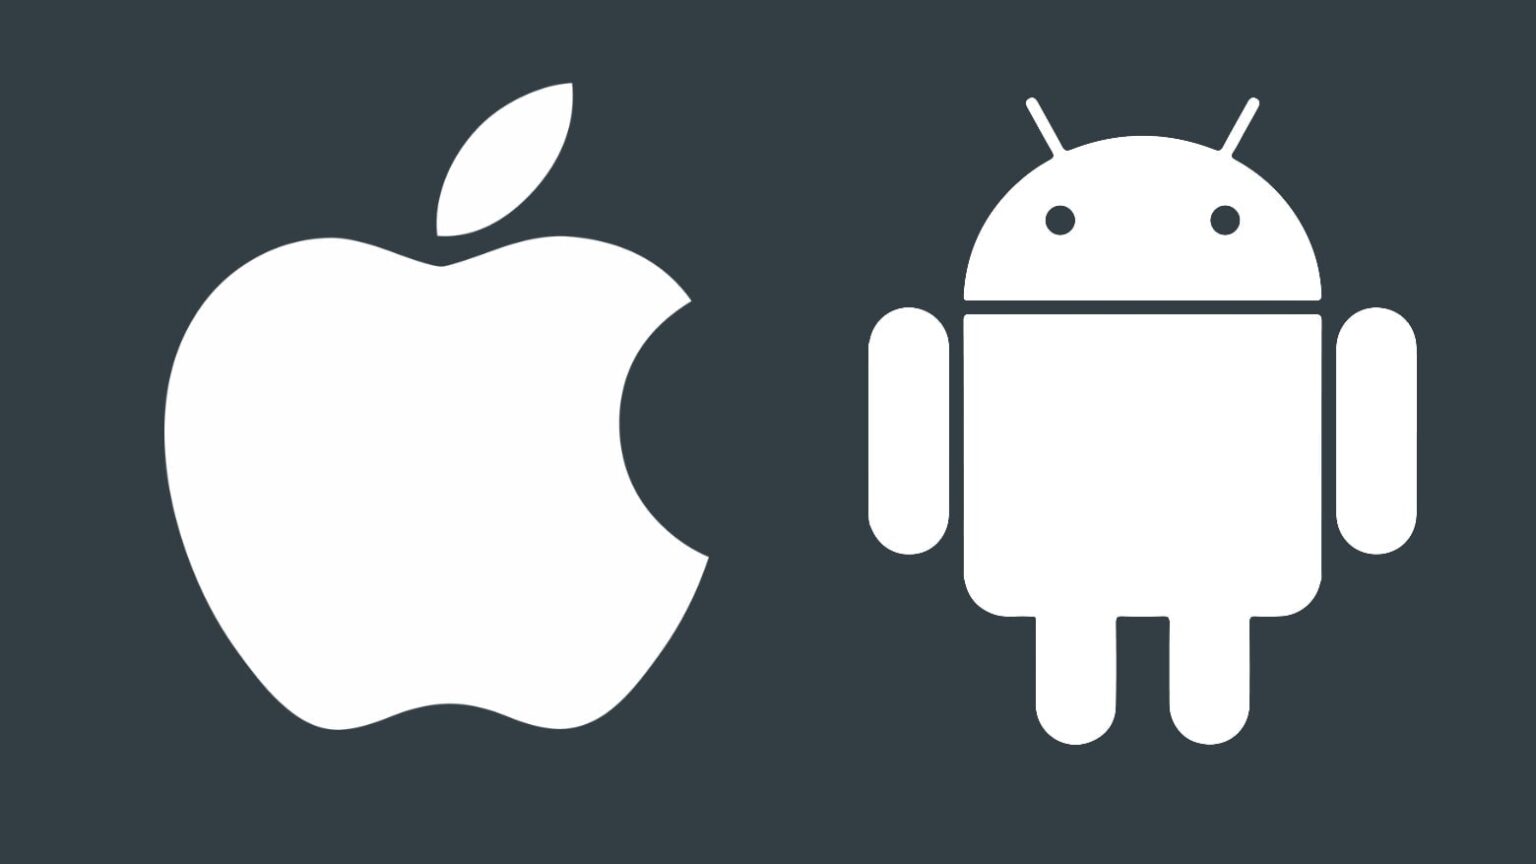 Apple will make it easier to switch from iPhone to Android